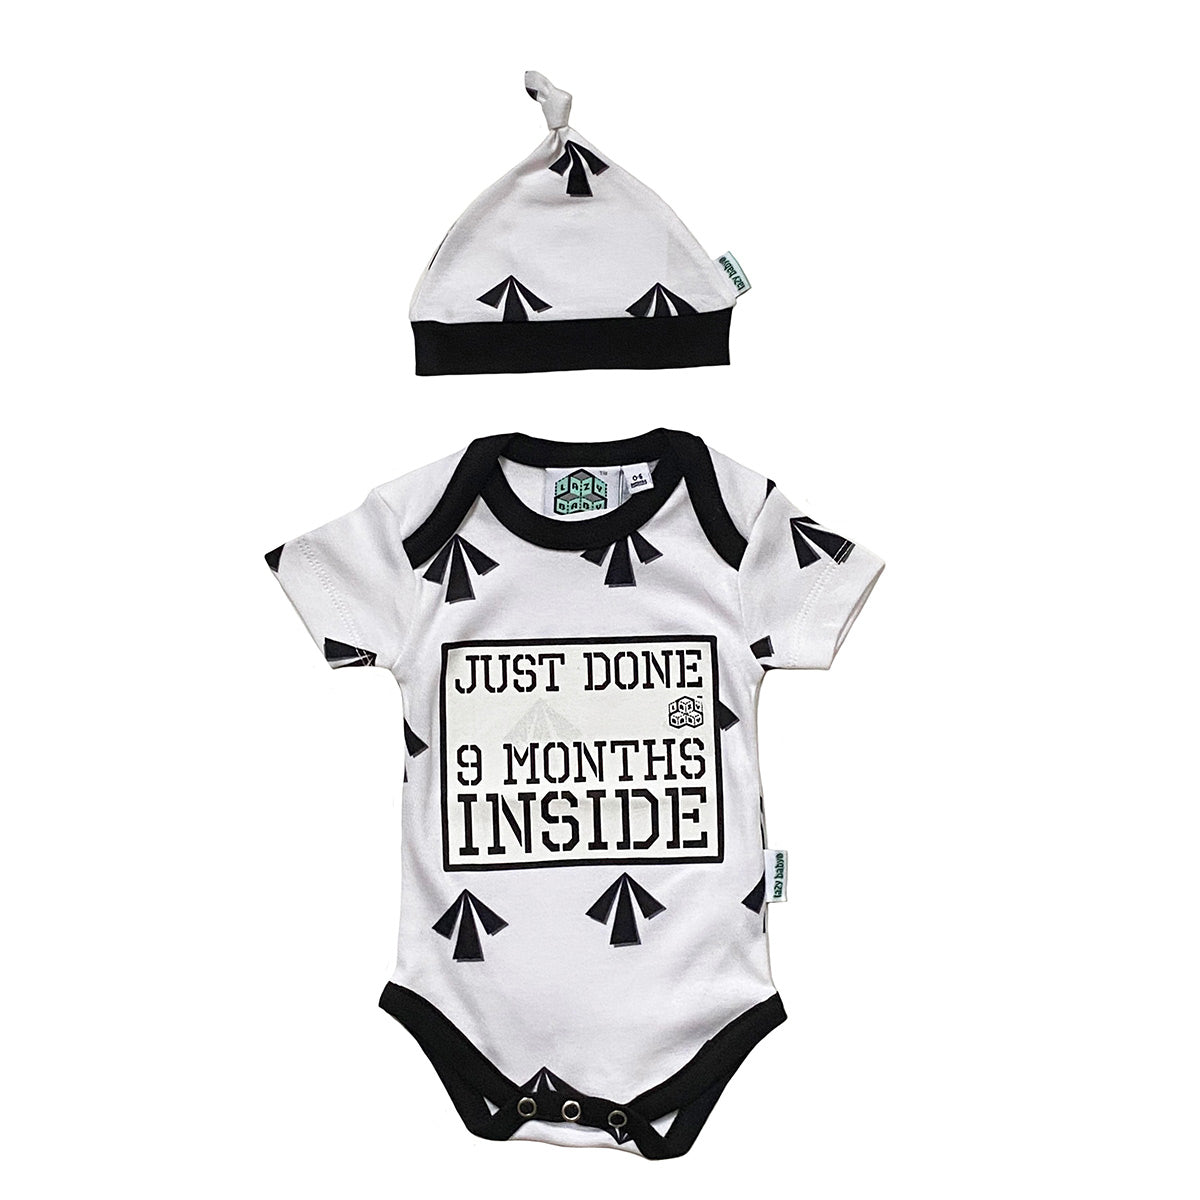 Just Done 9 Months Inside slogan vest with prisoner arrows design and matching hat, both black and white